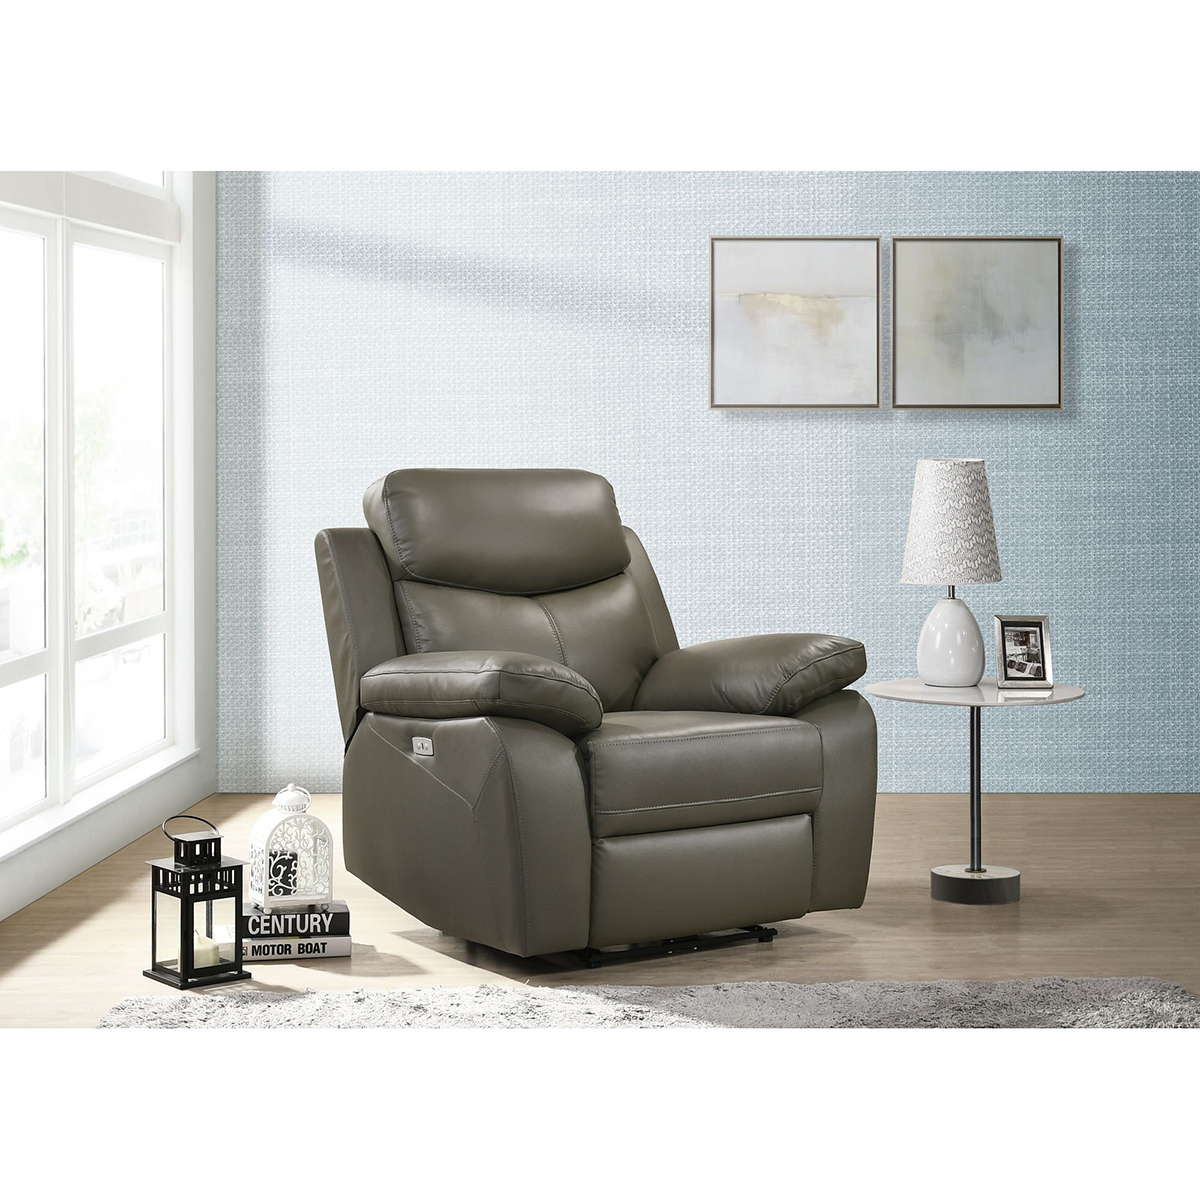 Recliners And Chairs | Boscov'S for Boscov&amp;#039;S Furniture Recliners